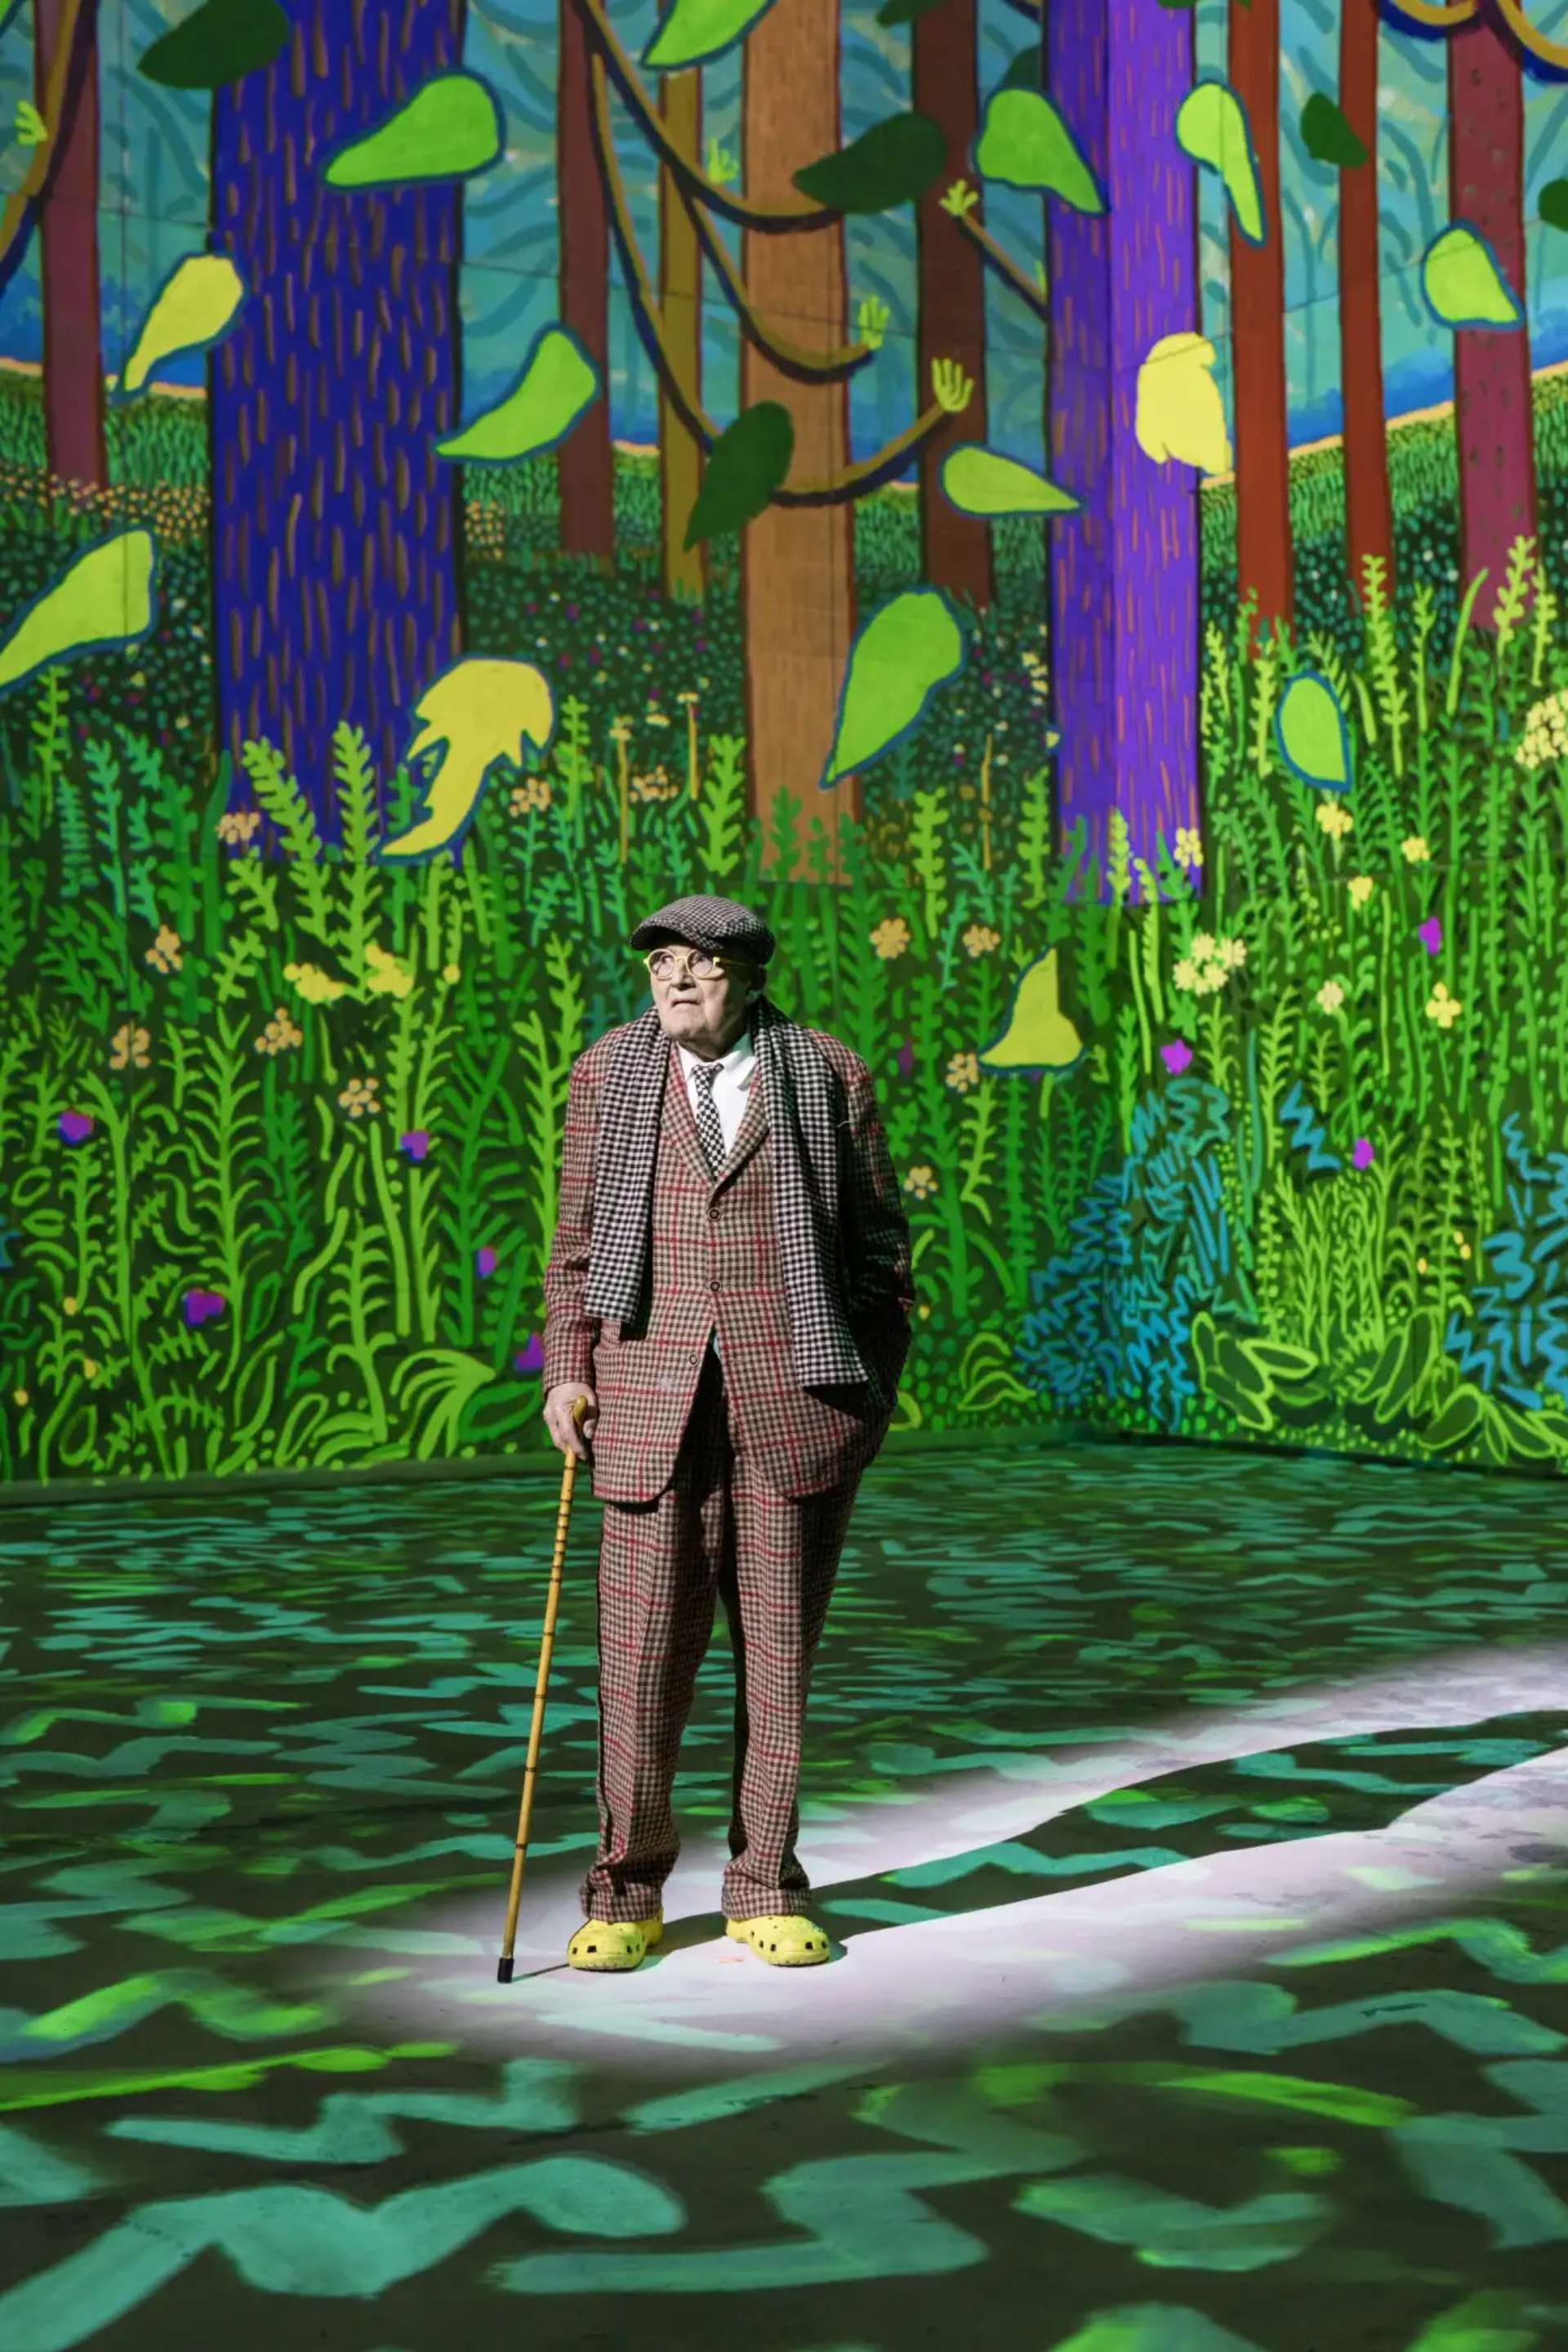 A photograph of artist David Hockney wearing a plaid suit and yellow Crocs in his Lightroom exhibition, with his digital drawing of a green forest projected on the walls and floor about him.